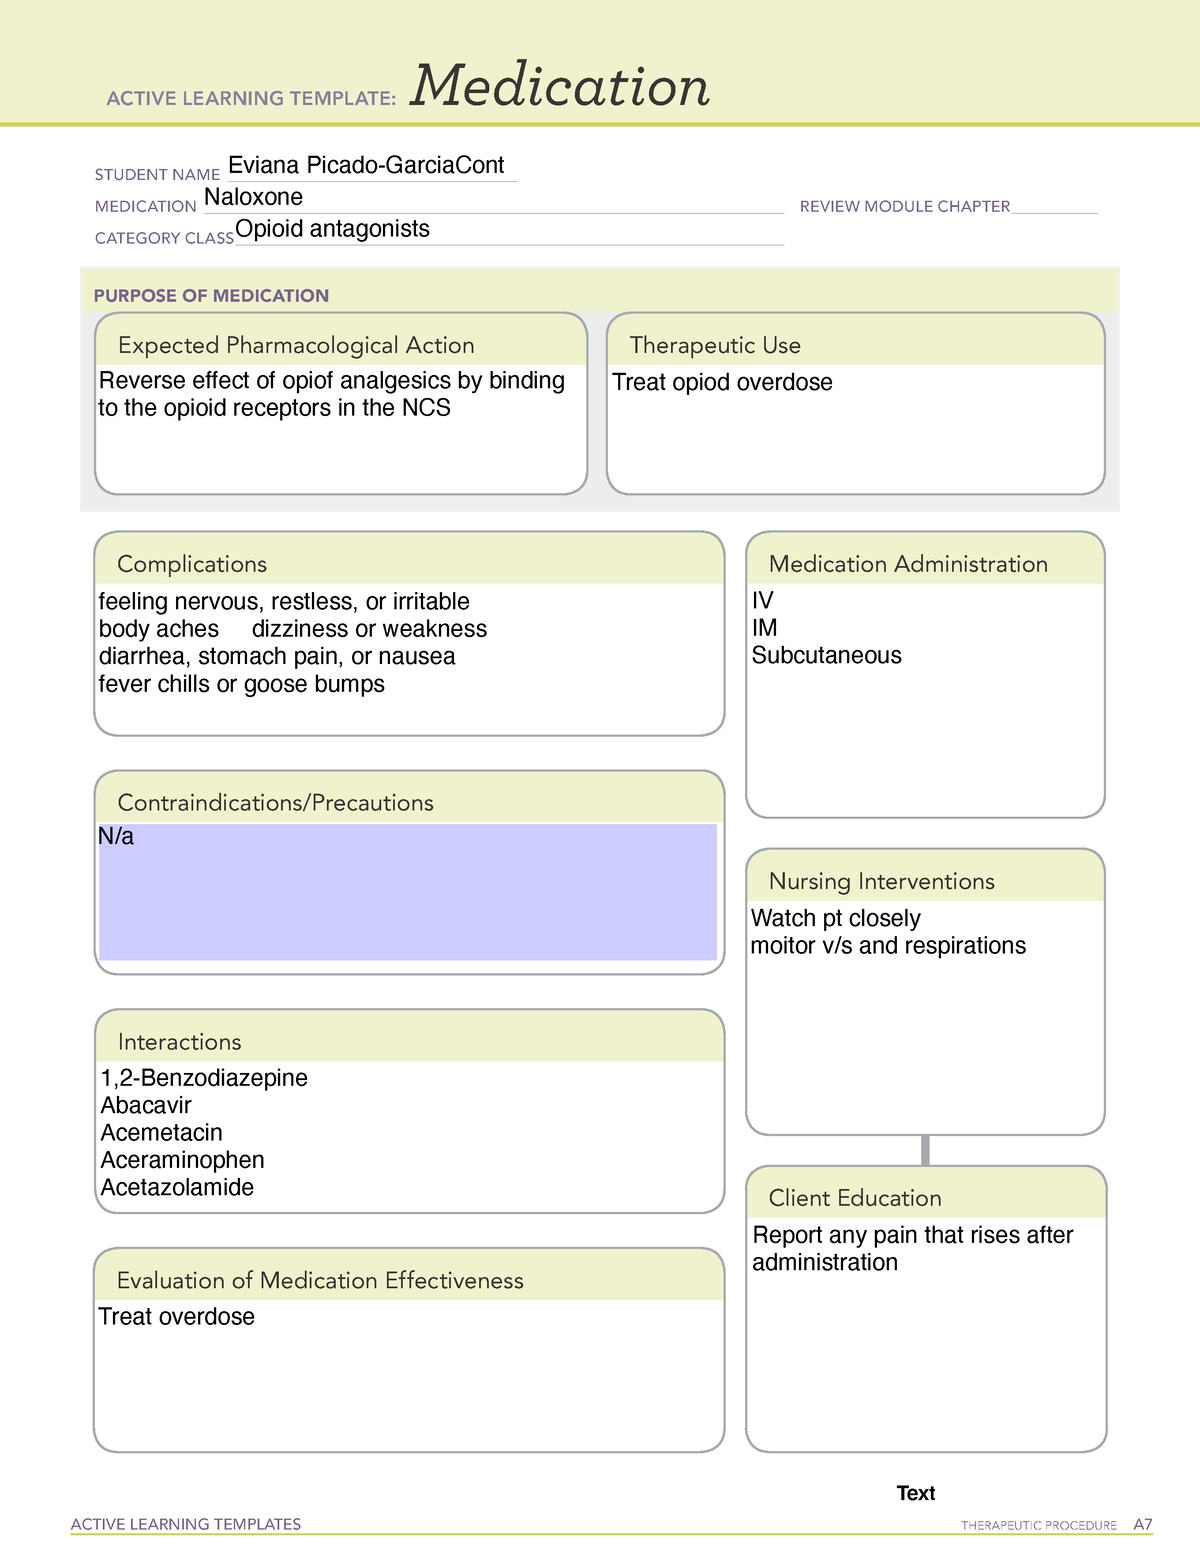 Naloxone Med Active Learning Template medication 2 ACTIVE LEARNING